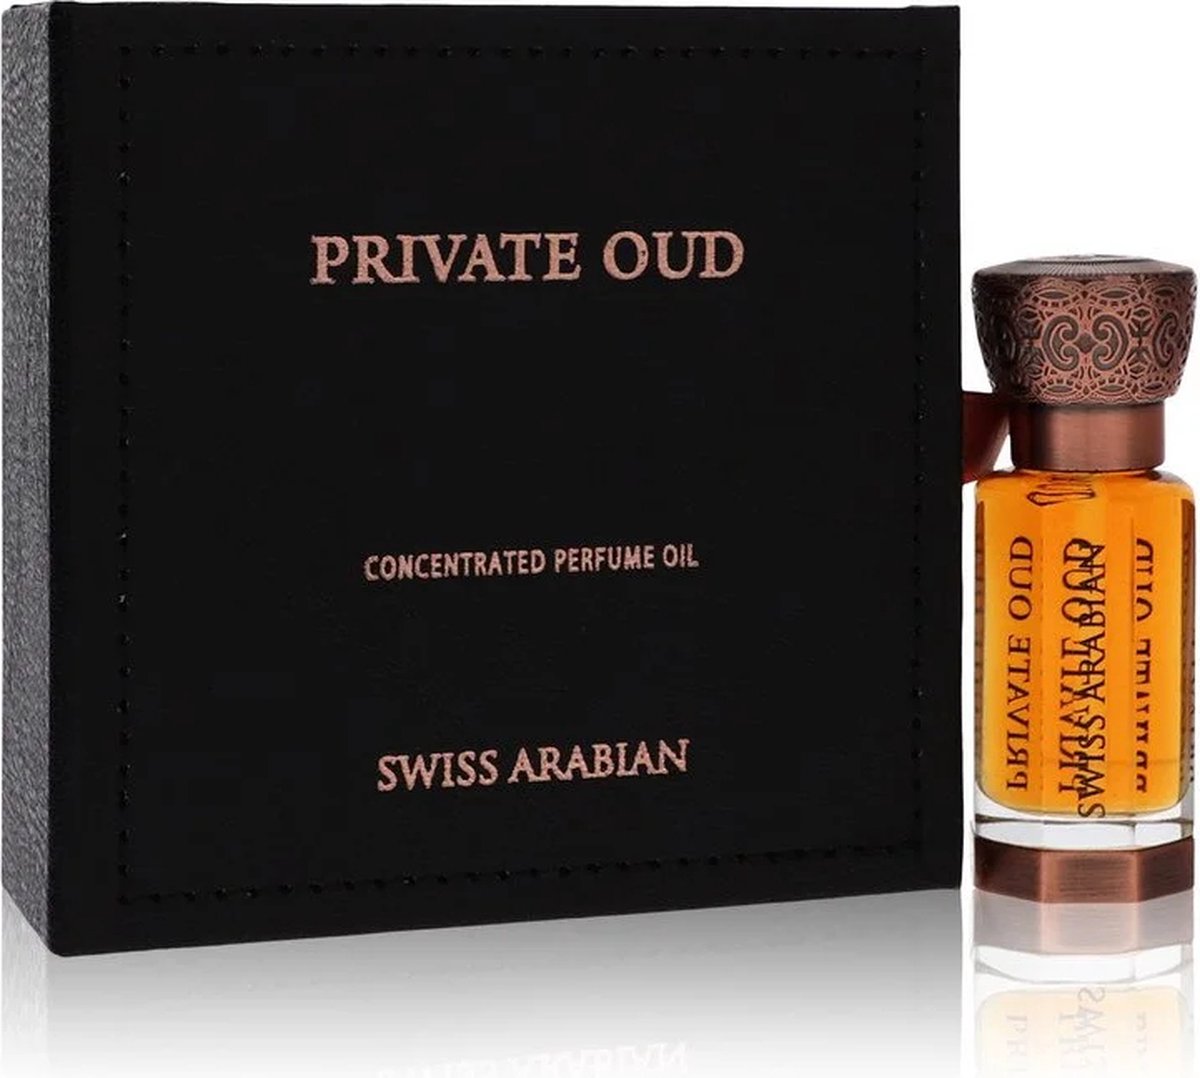 Swiss Arabian Private Oud concentrated perfume oil (unisex) 11 ml